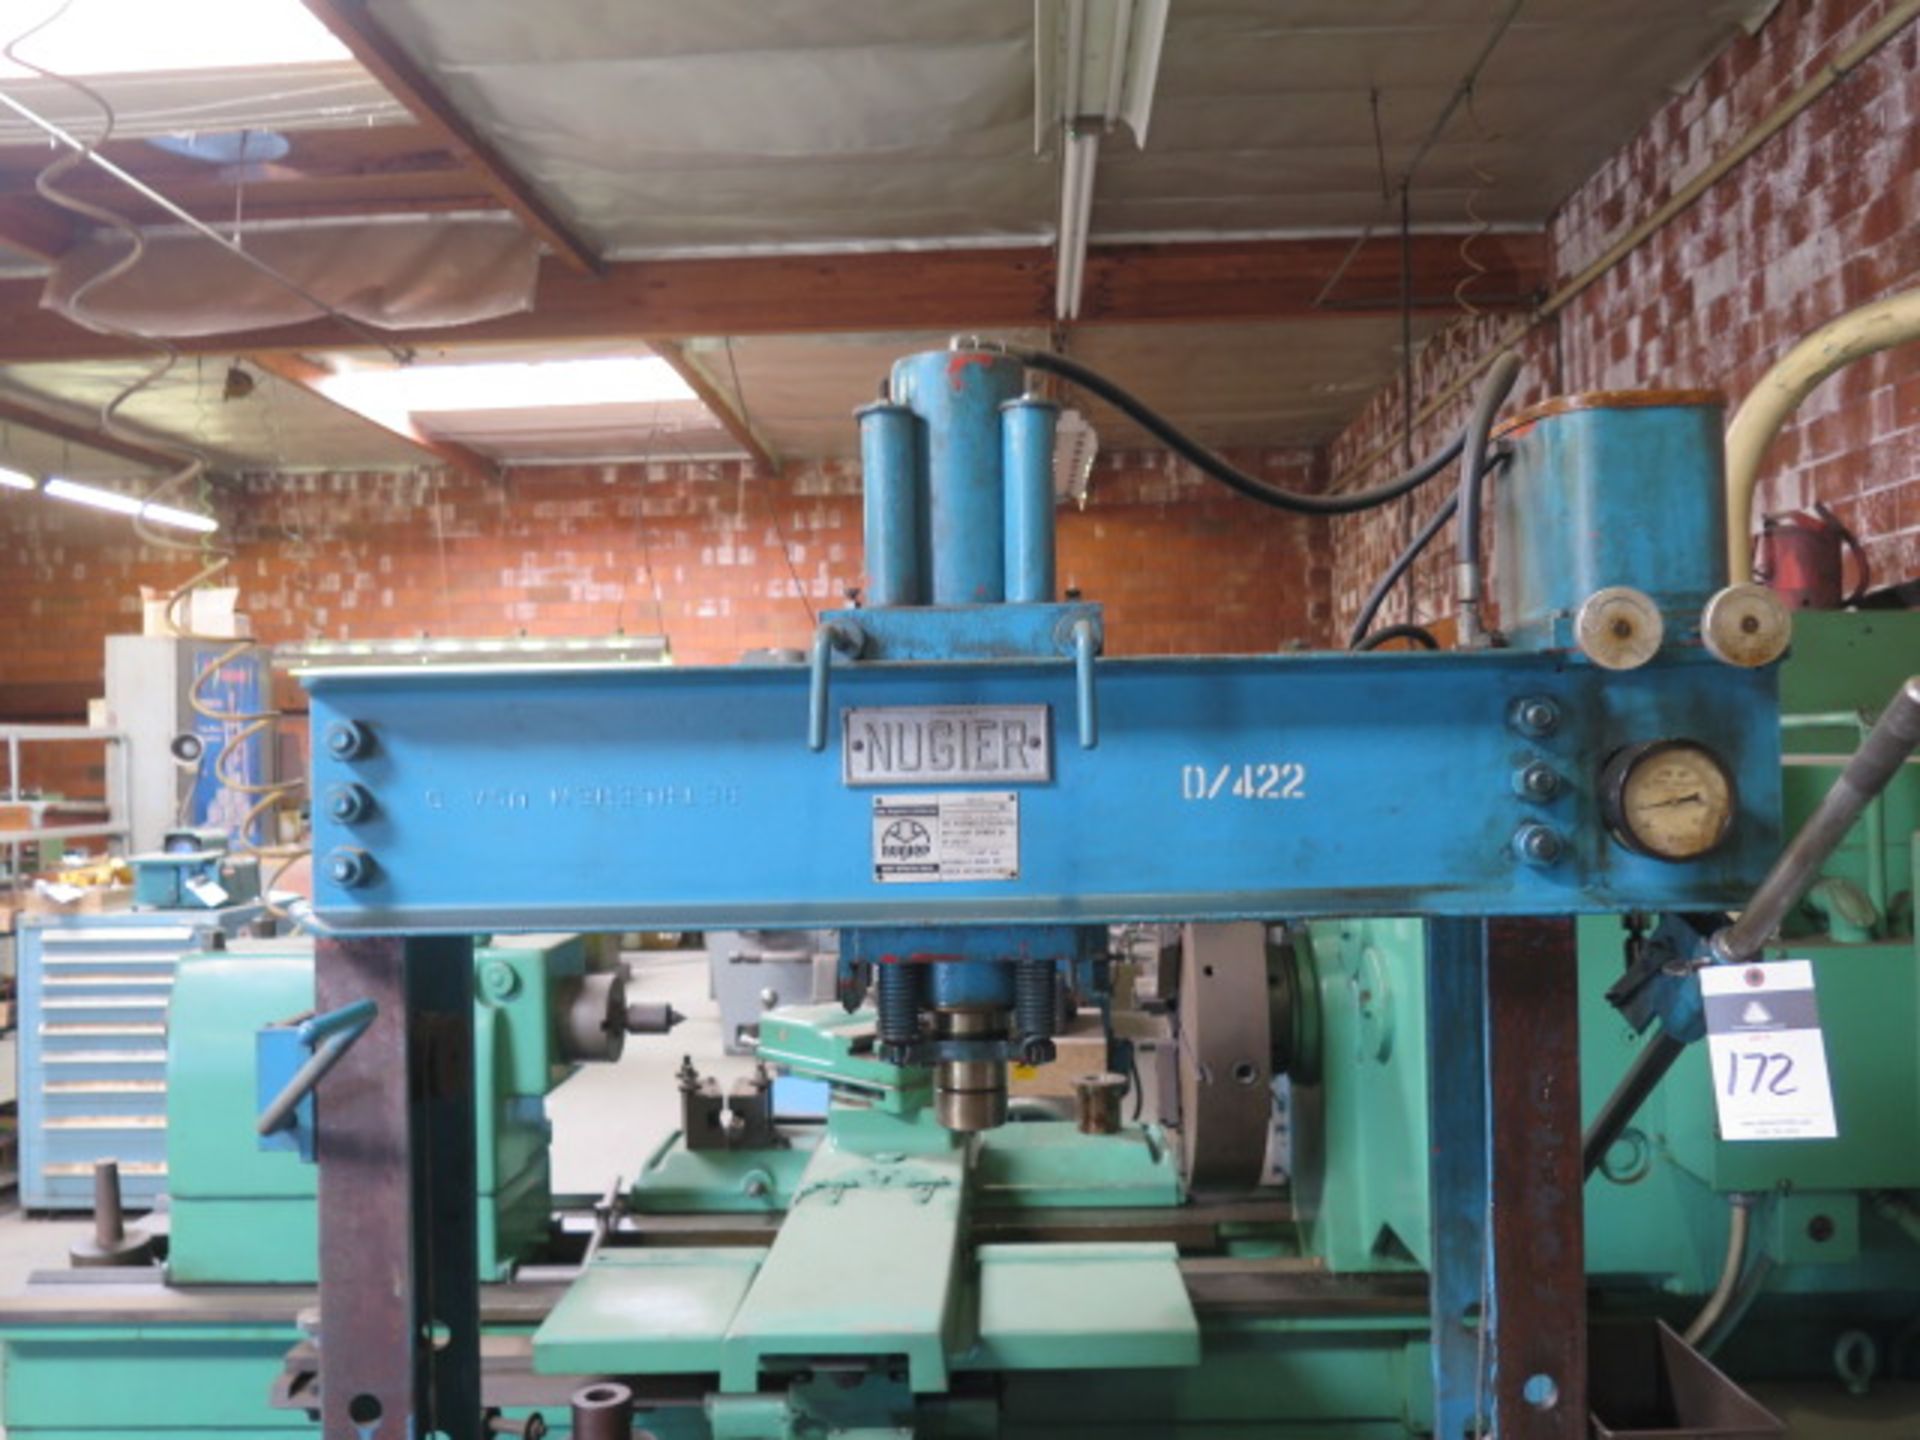 Nugier H50-H 50-Ton Sliding Ram Hydraulic H-Frame Press s/n 256118 (SOLD AS-IS - NO WARRANTY) - Image 2 of 6